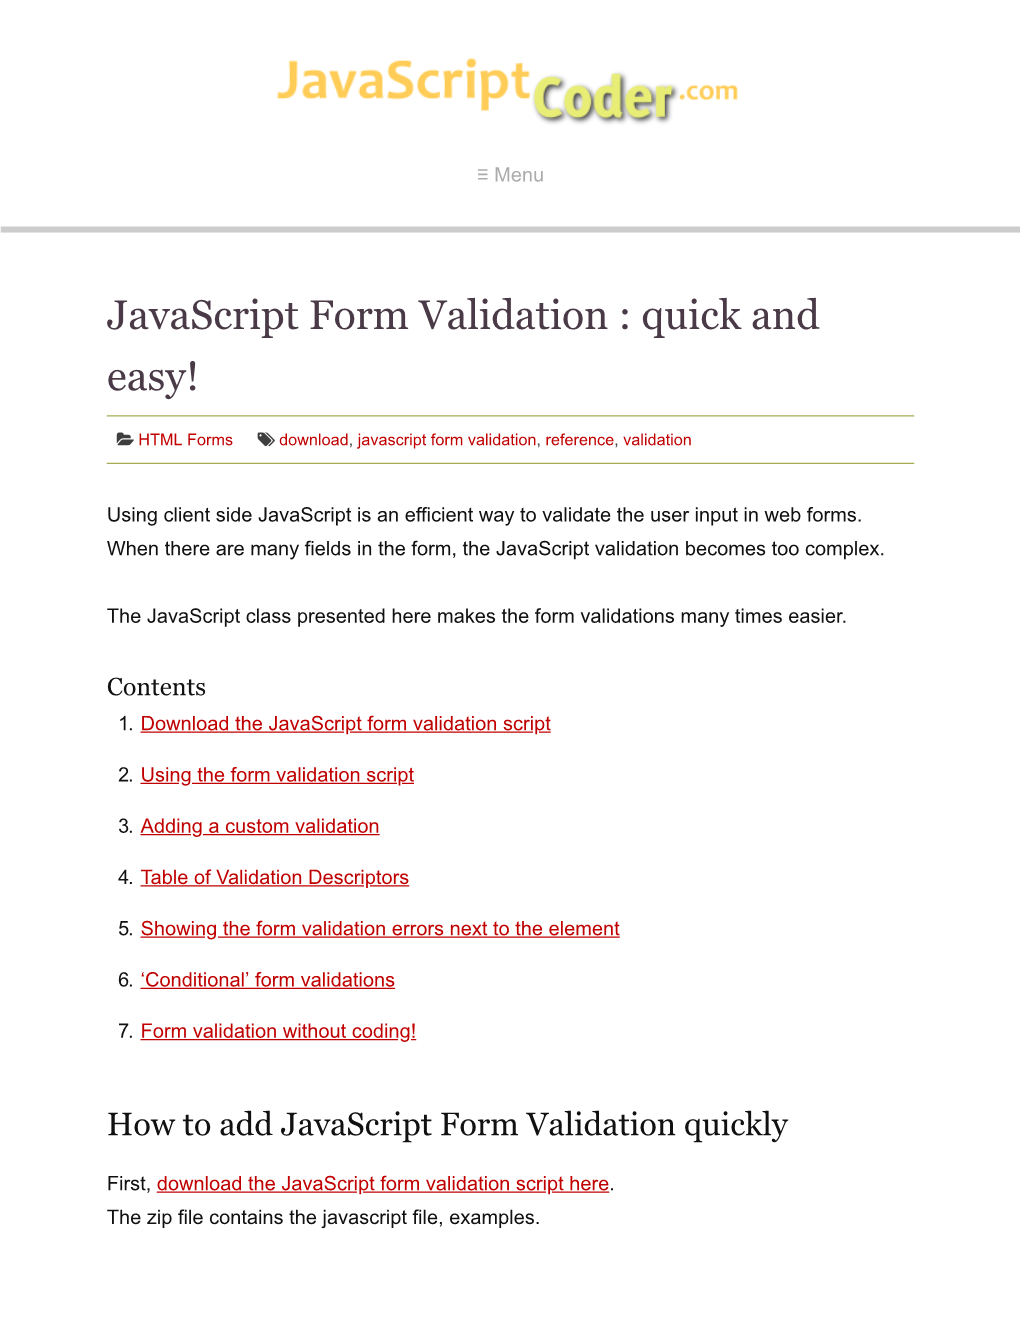 Javascript Form Validation : Quick and Easy!